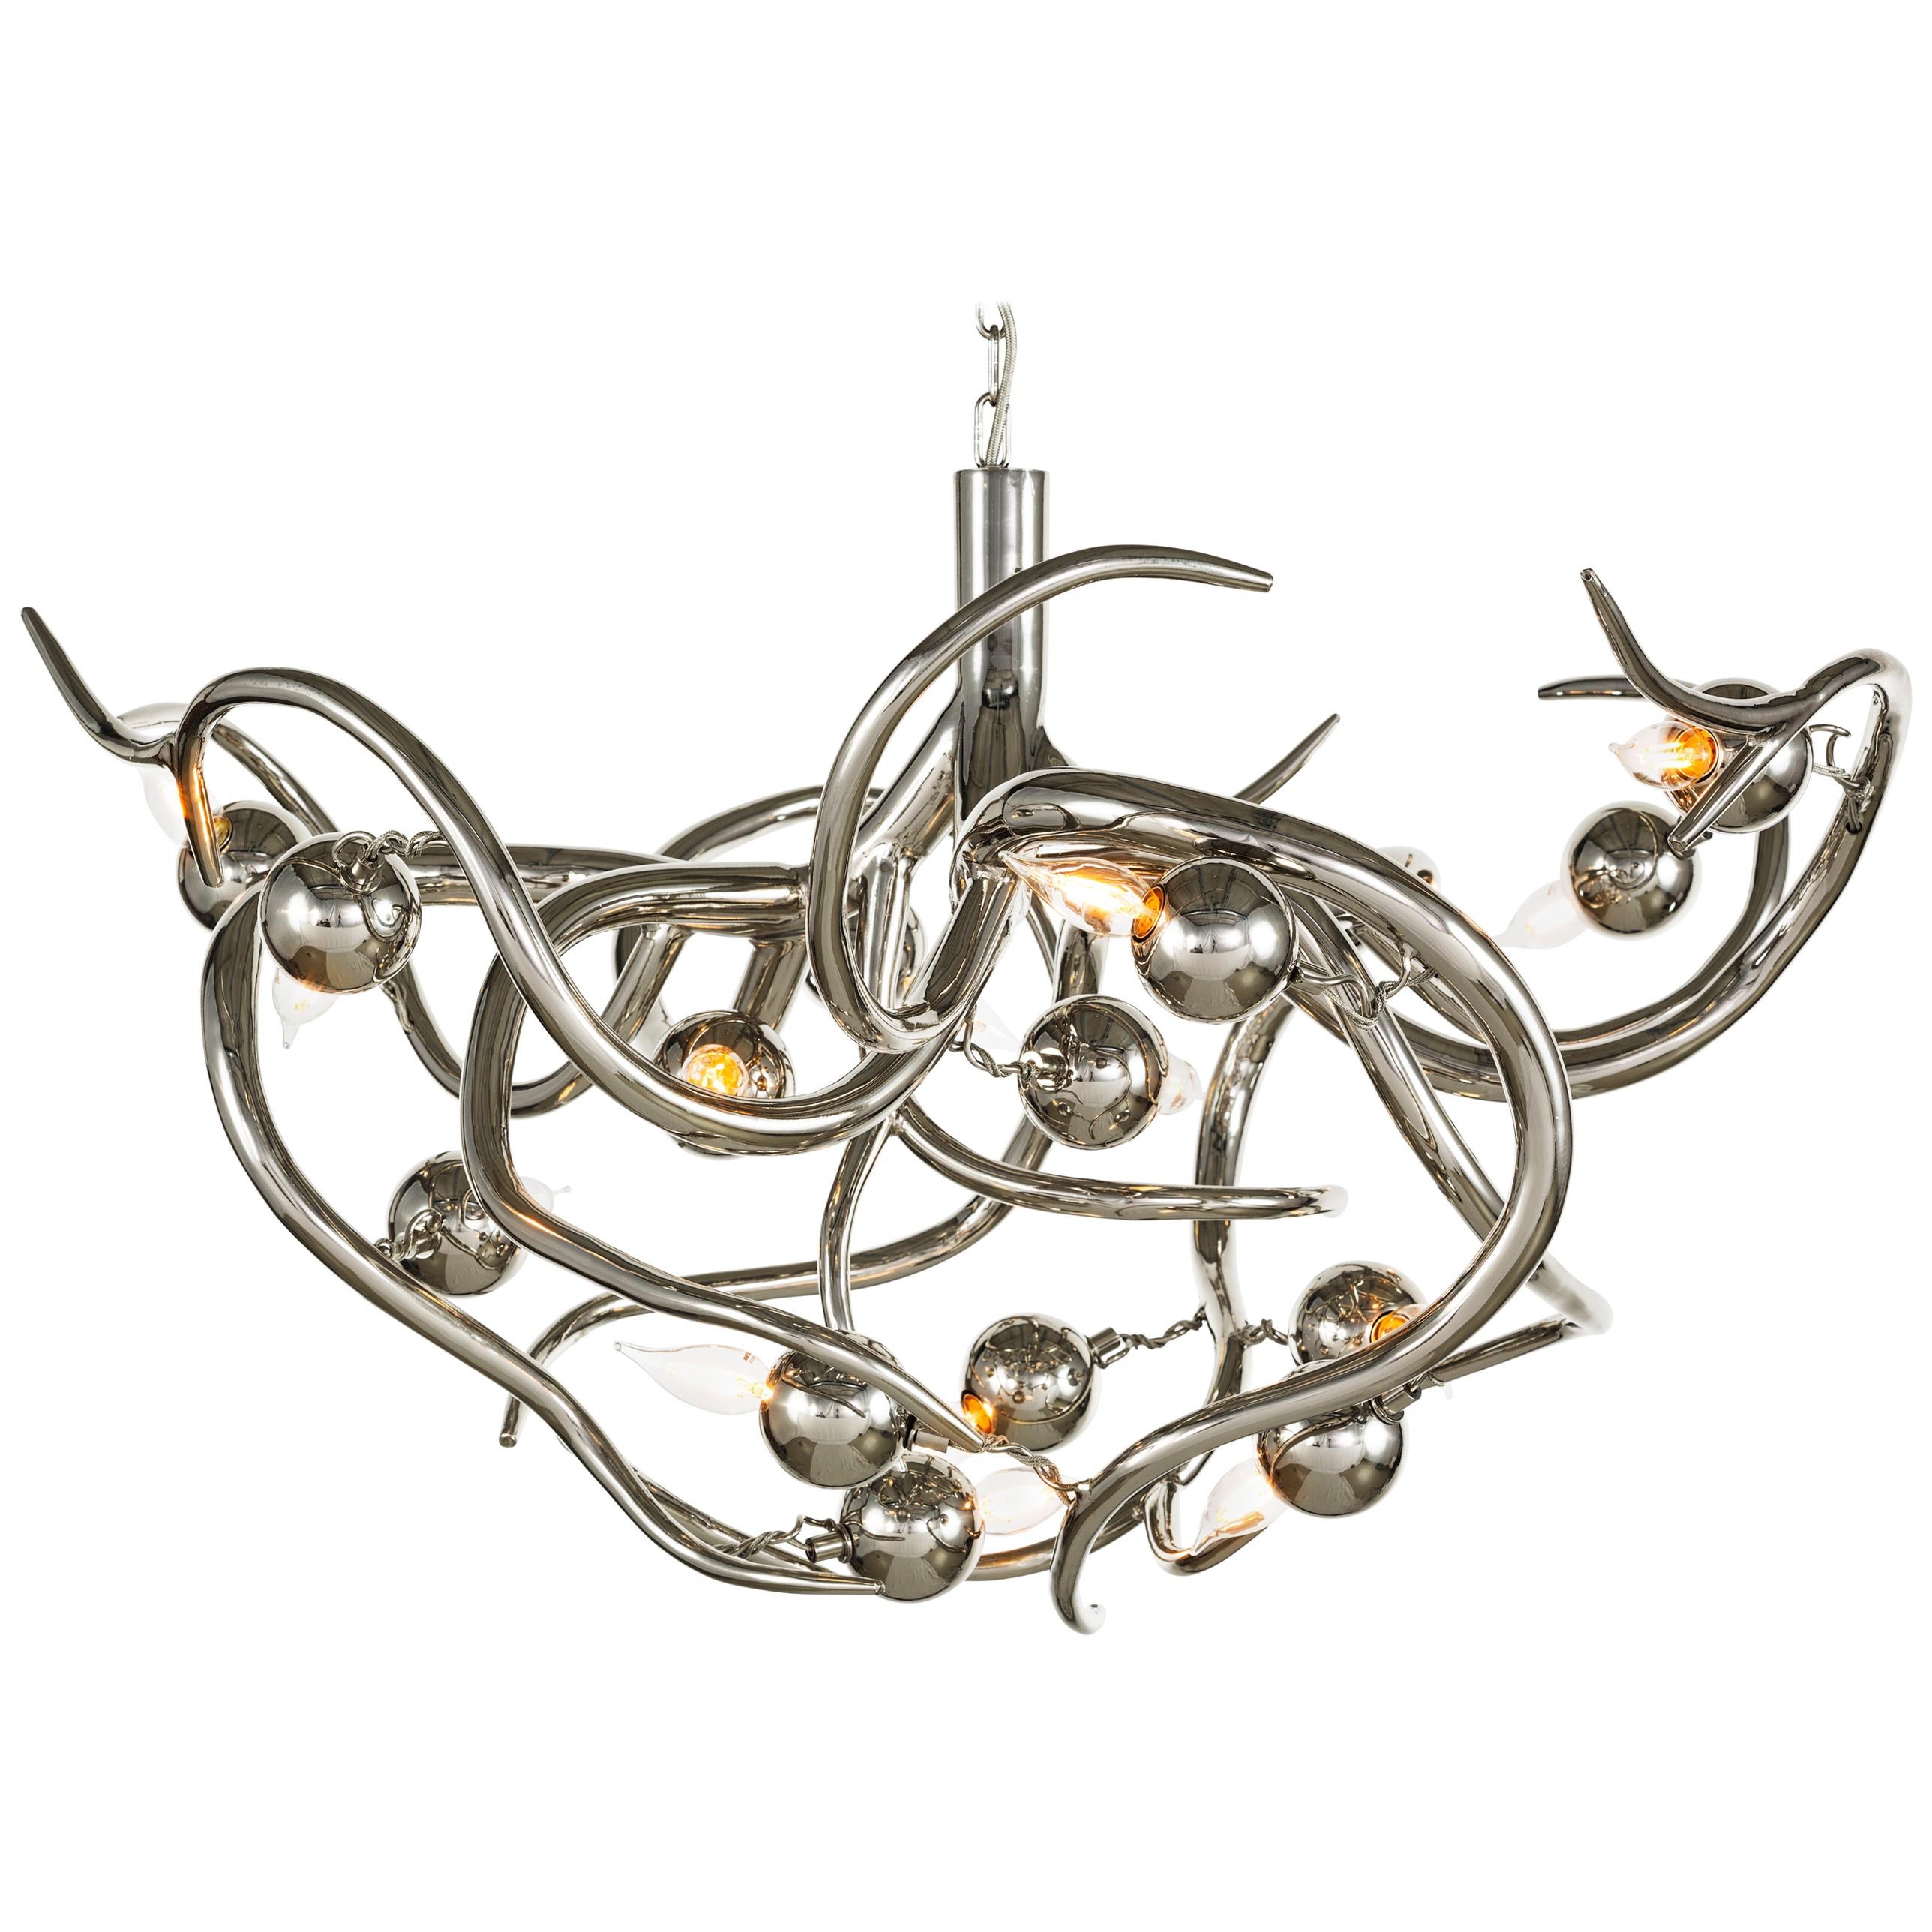 Modern Chandelier in a Nickel Finish - Eve Collection, by Brand van Egmond   For Sale